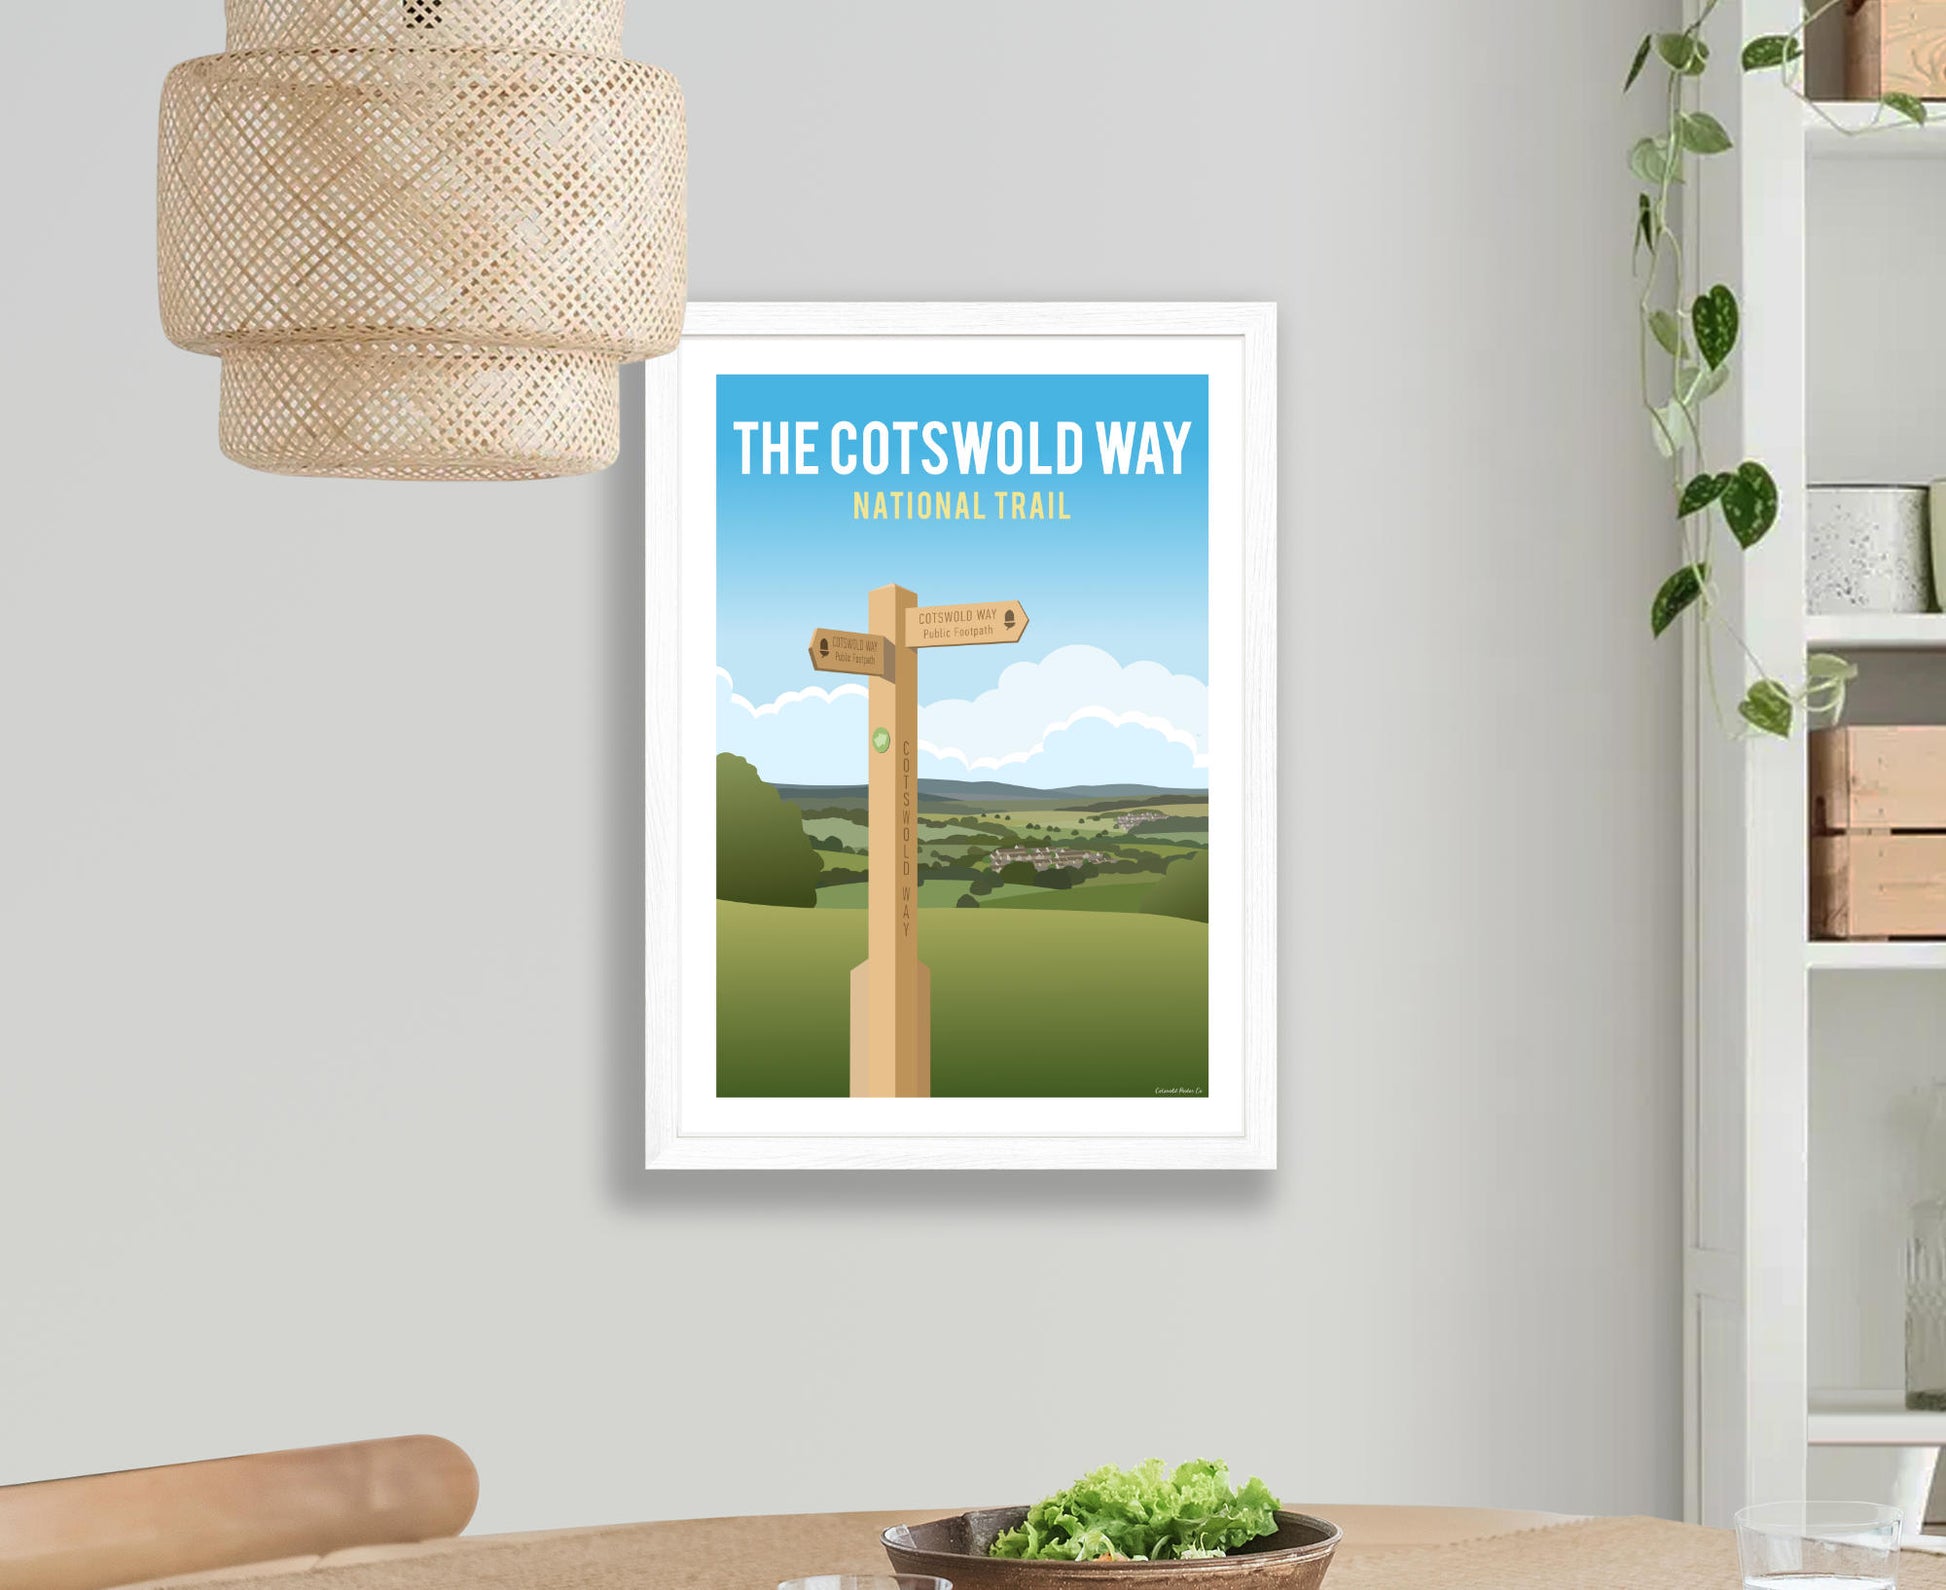 The Cotswold Way Poster in white frame